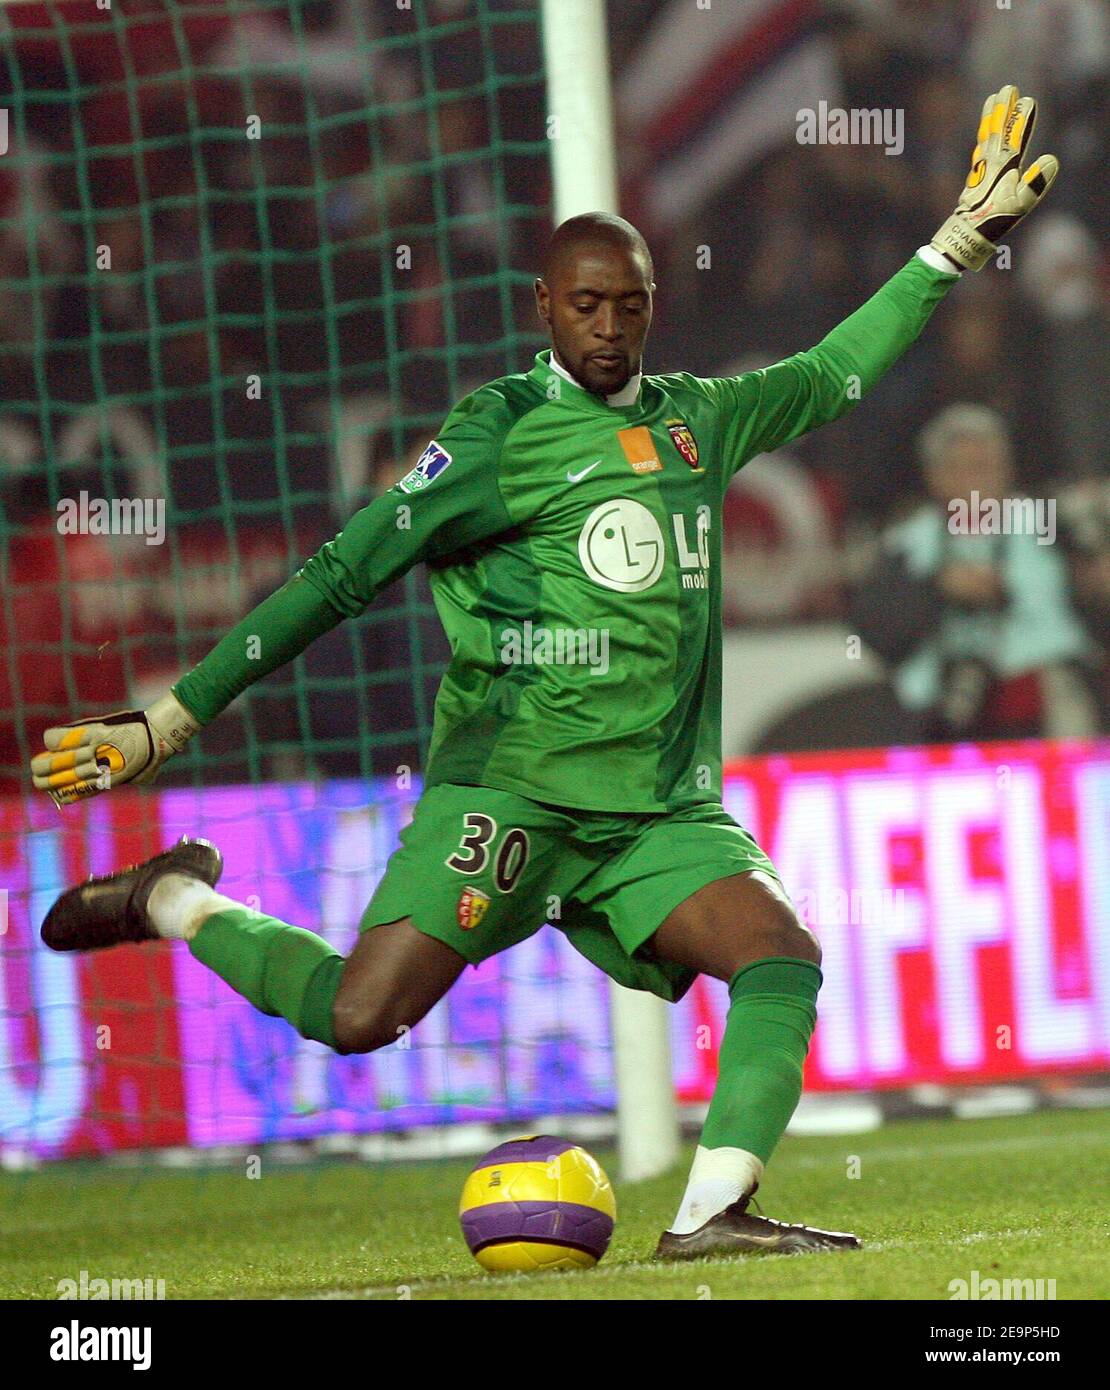 Lens' goalkeeper Charles Itandje during the French first league football match, PSG vs Lens at the Parc des Princes in Paris, France on November 5, 2006. Lens won 3-1. Photo by Mehdi Taamallah/Cameleon/ABACAPRESS.COM Stock Photo